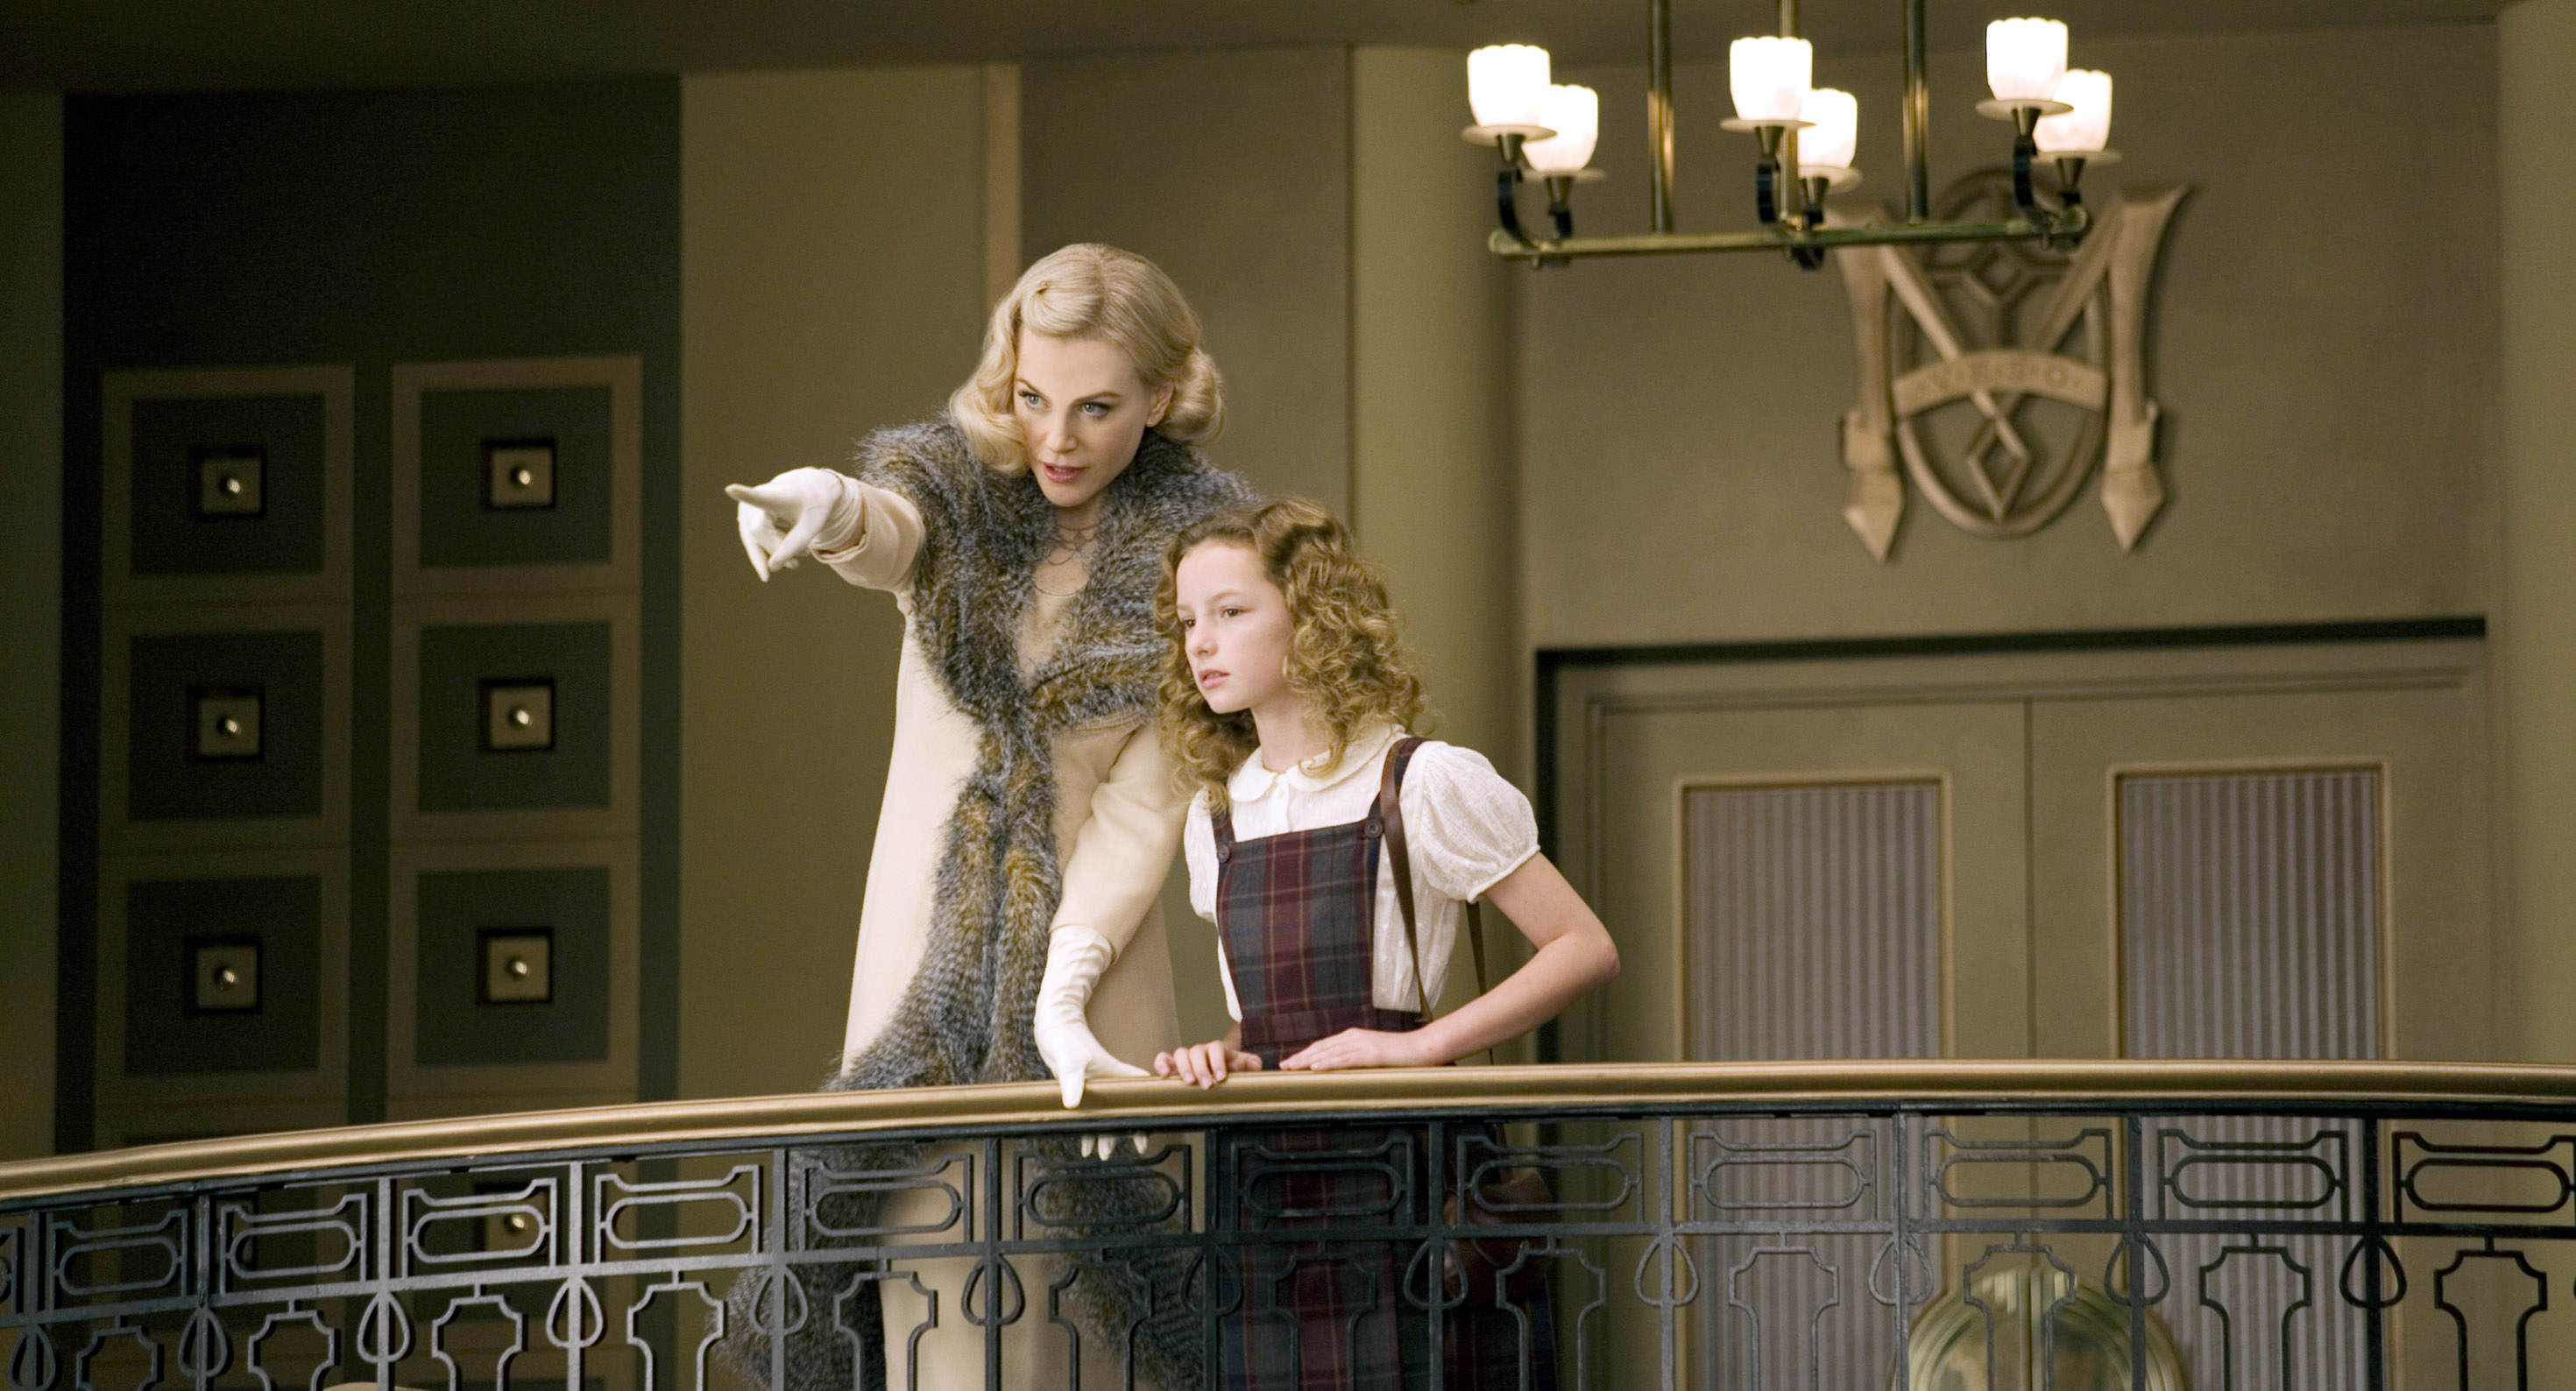 Nicole Kidman points out something to Lyra